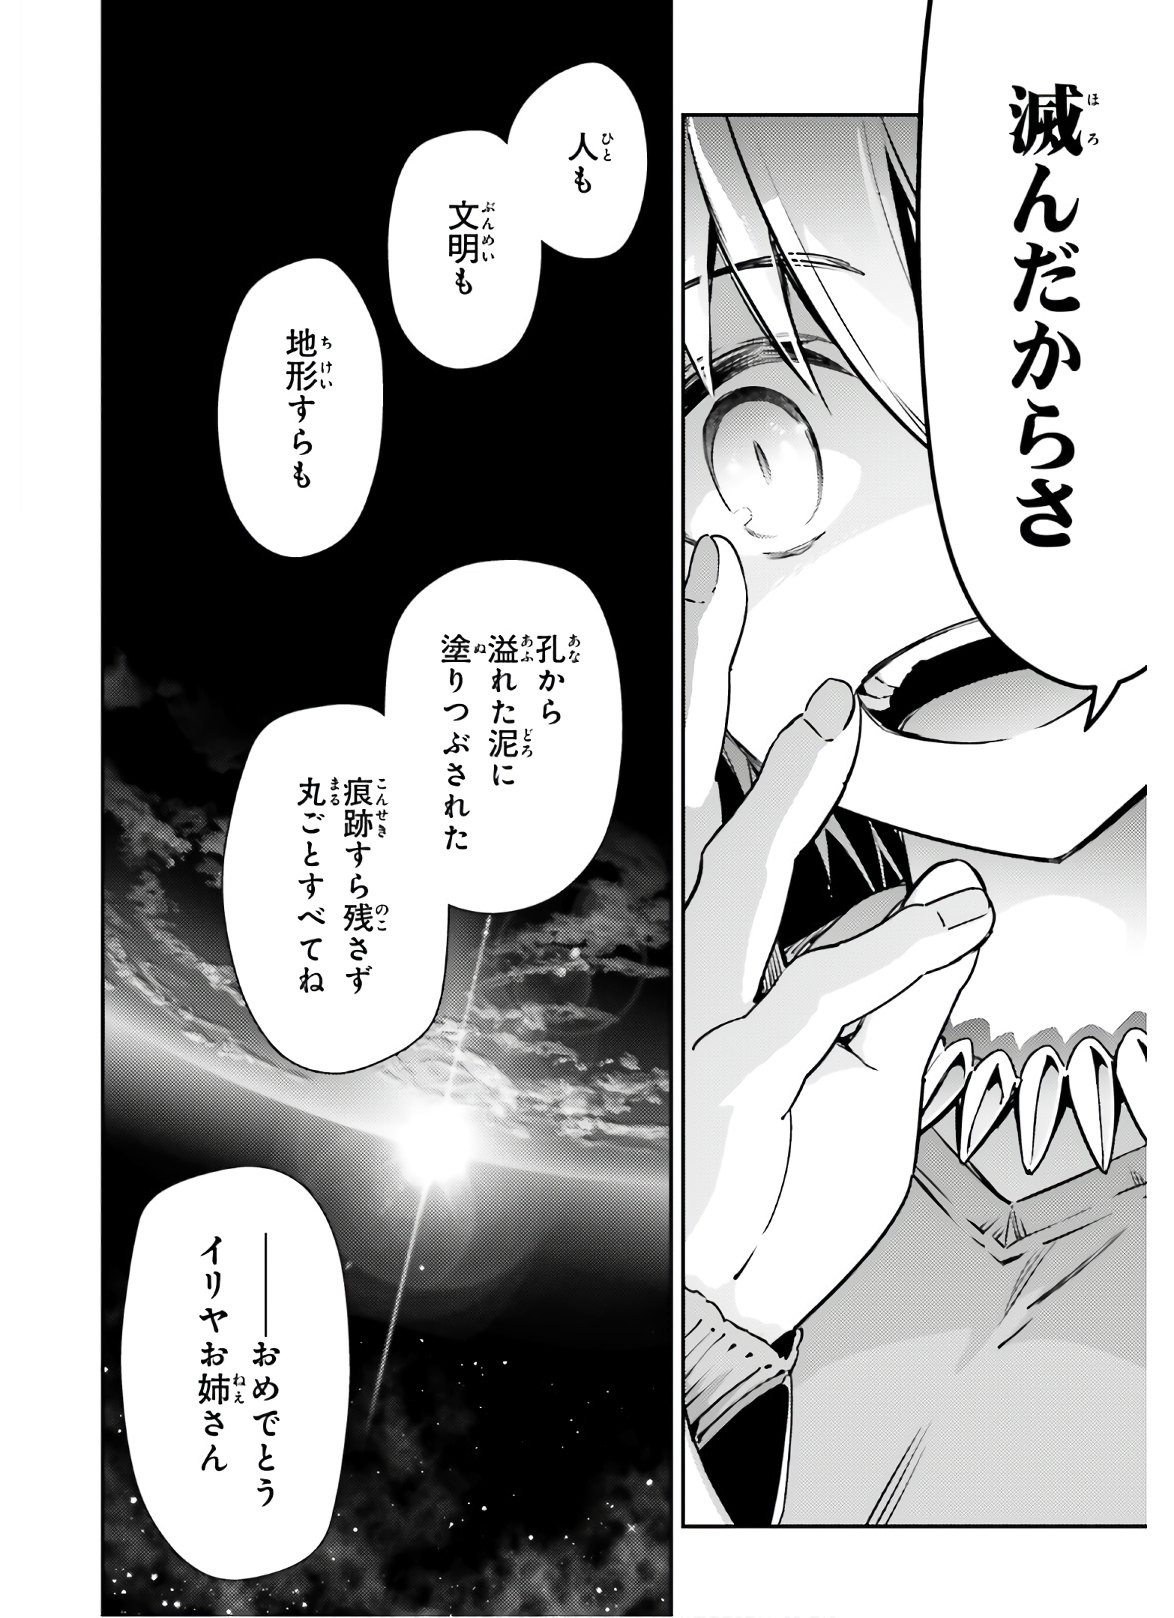 Fate/Kaleid Liner Prisma Illya Drei! - Chapter 62-1 - Page 4